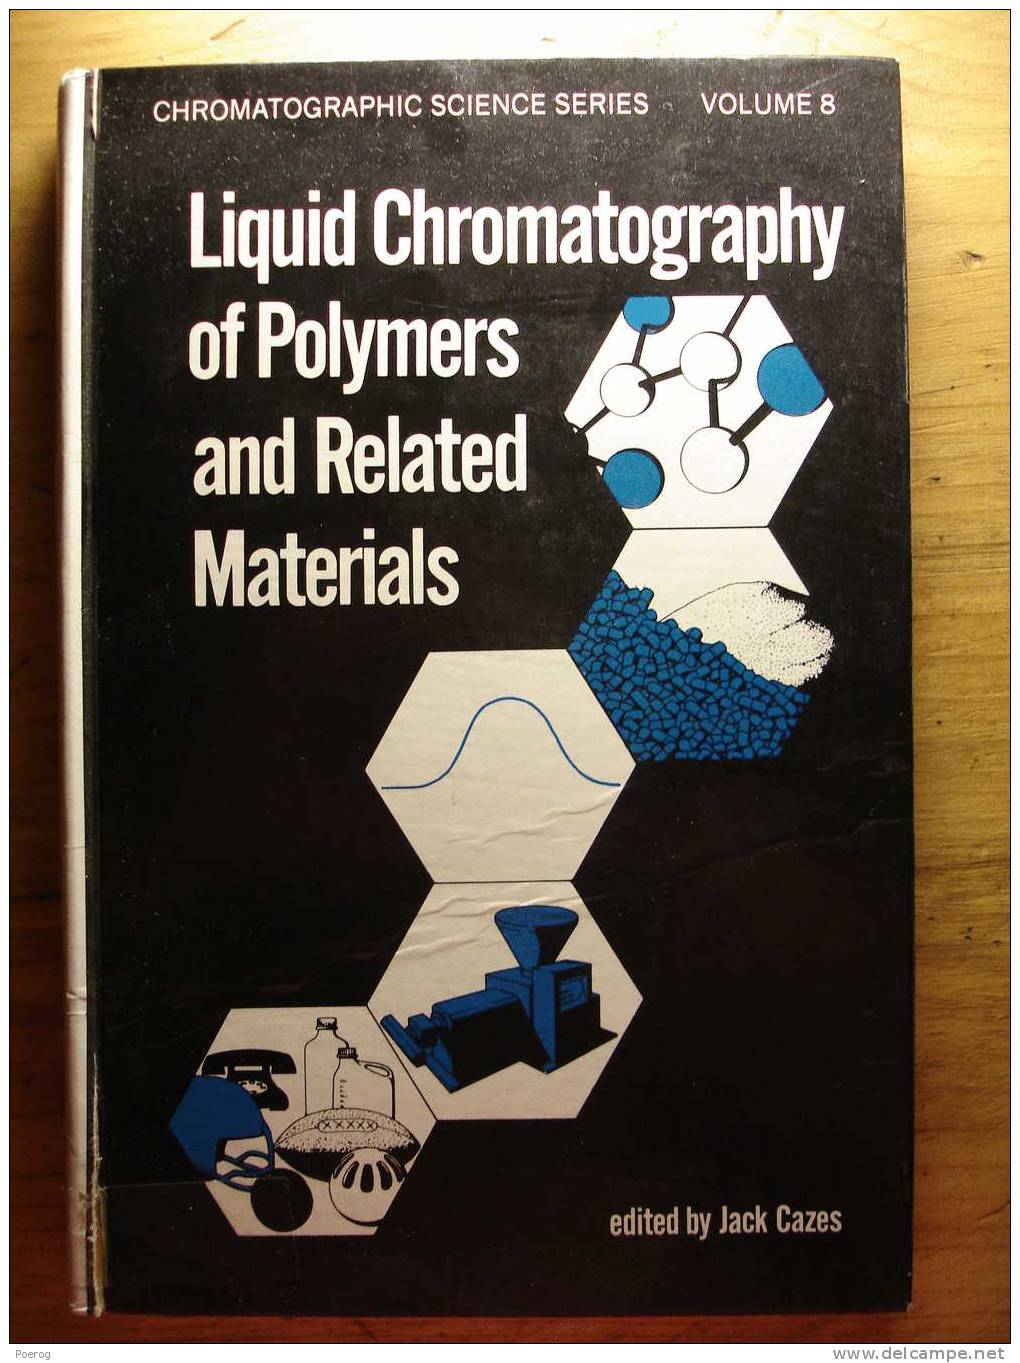 LIQUID CHROMATOGRAPHY OF POLYMERS AND RELATED MATERIALS By JACK CAZES - DEKKER NEW YORK 1977 - Chimie